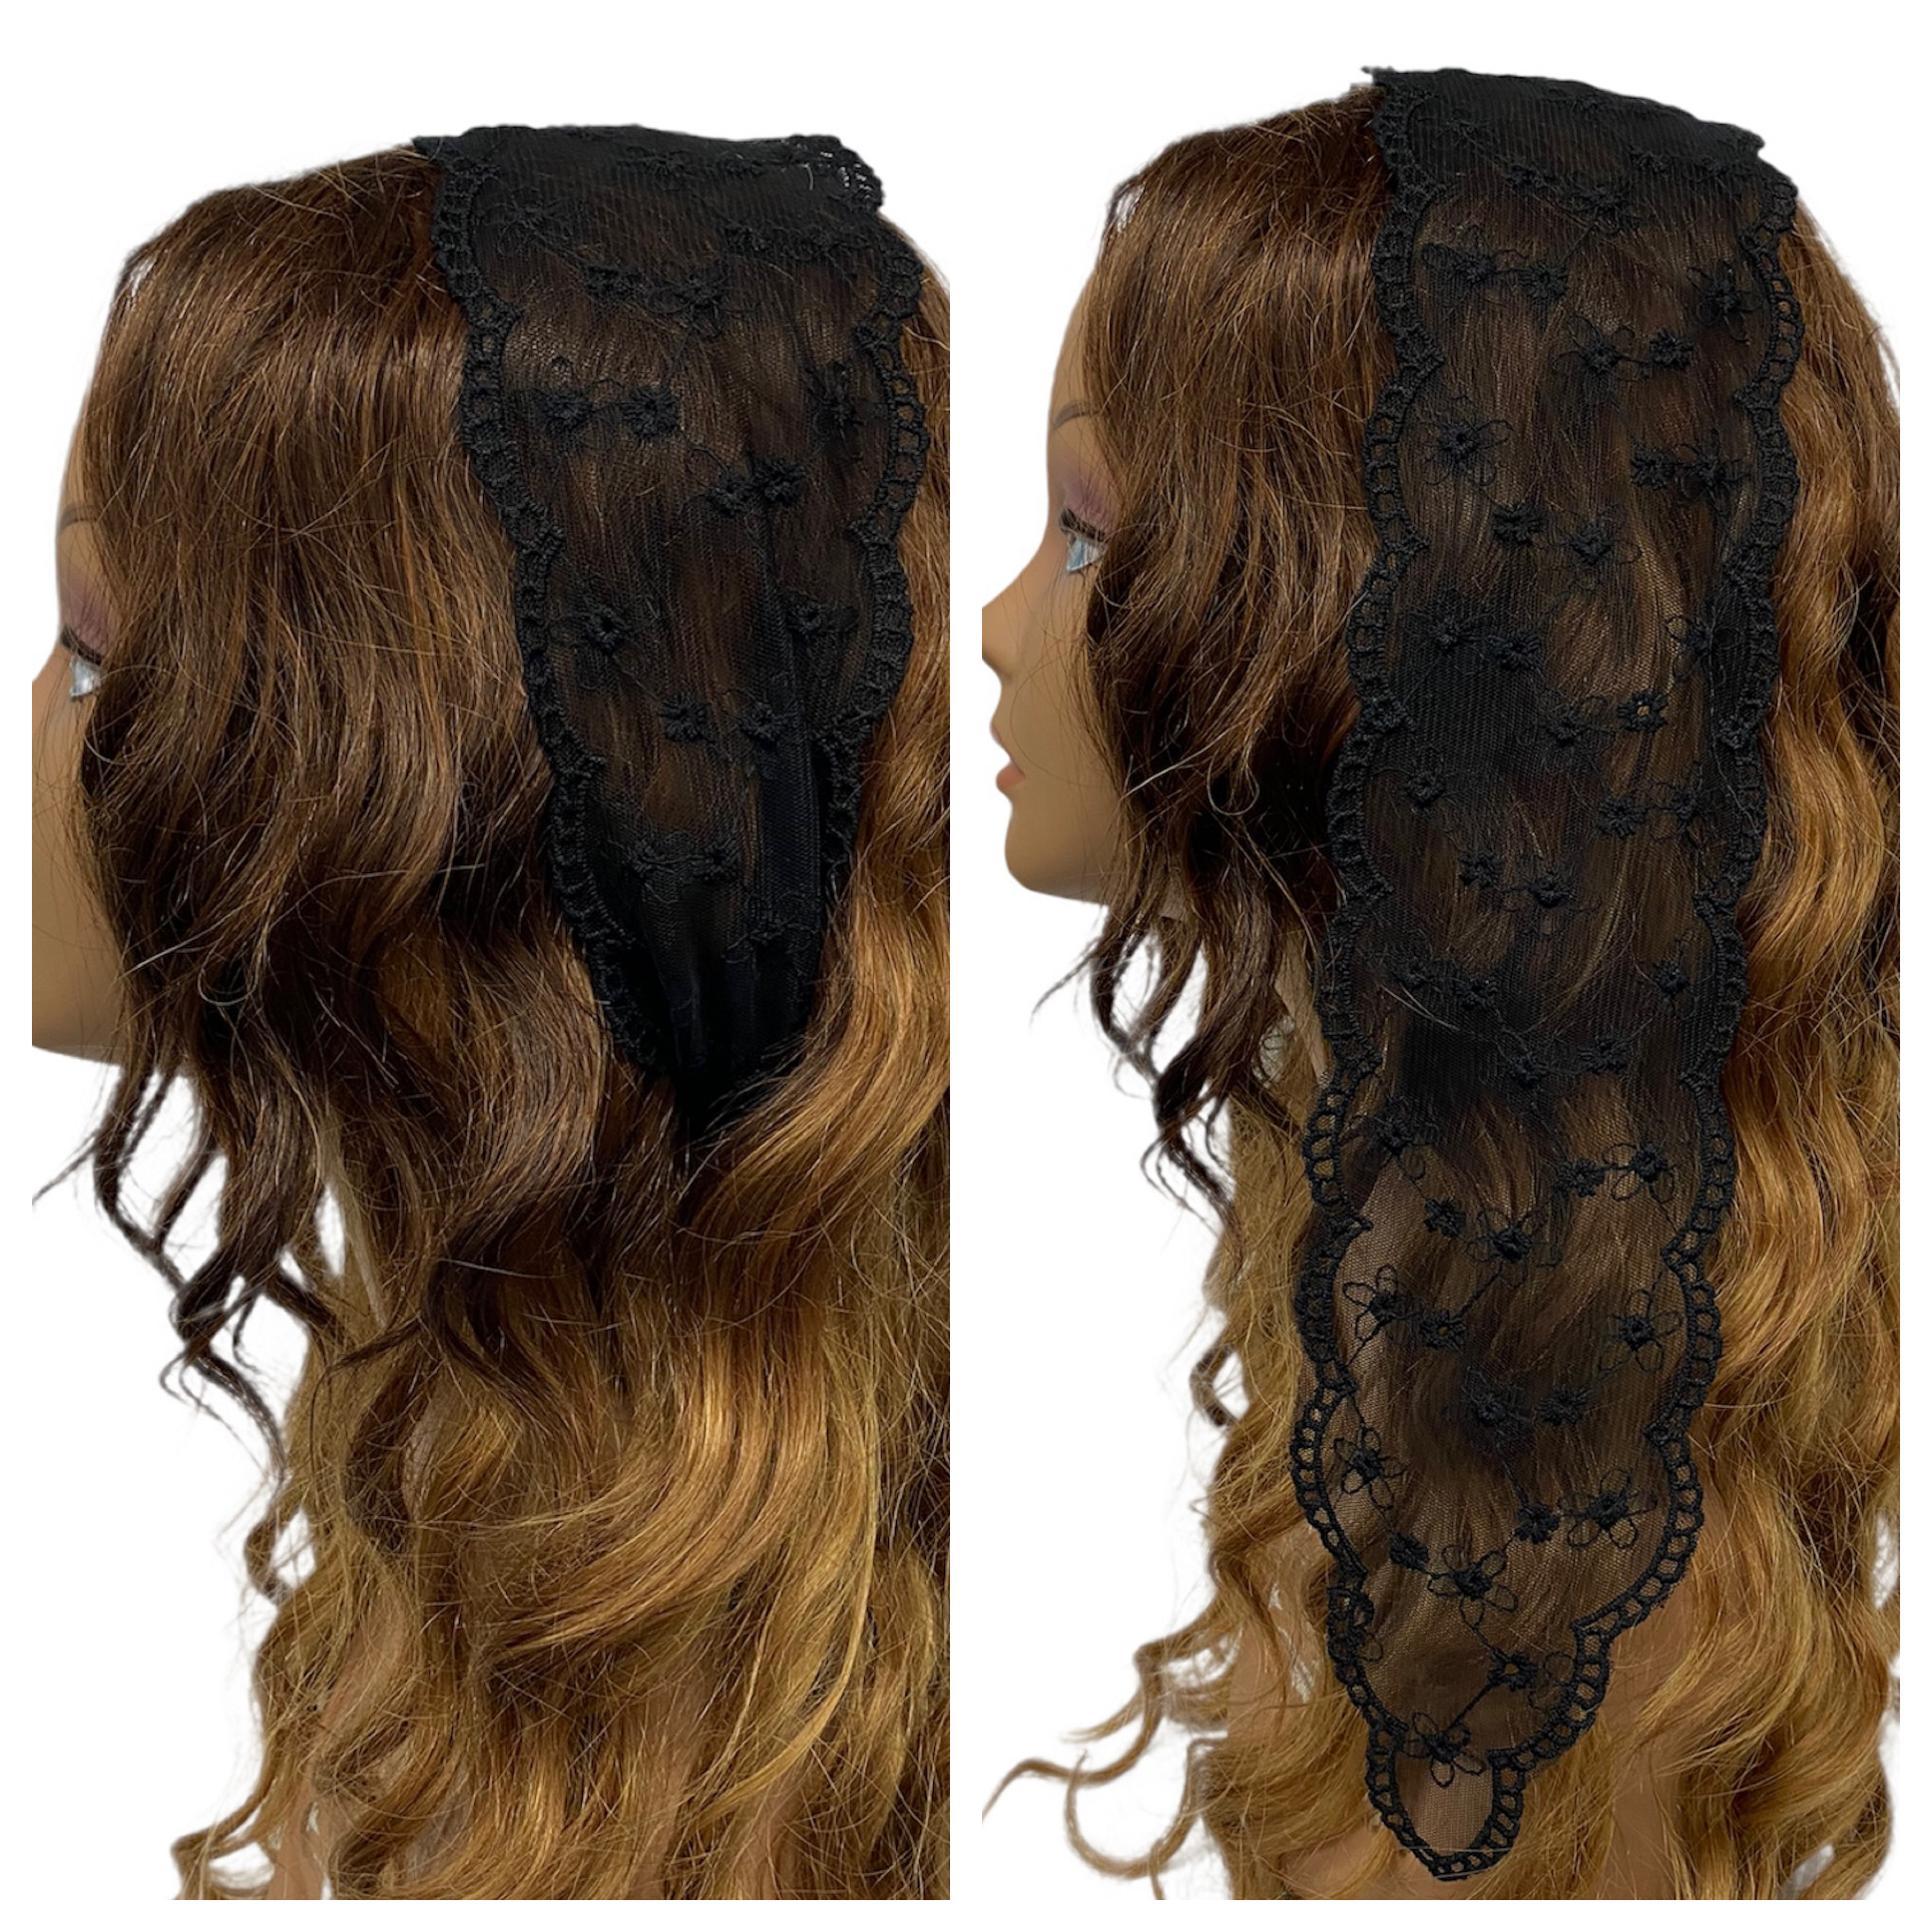 New OB Skinny Lace Floral Embroidered Headband Scarf-Black